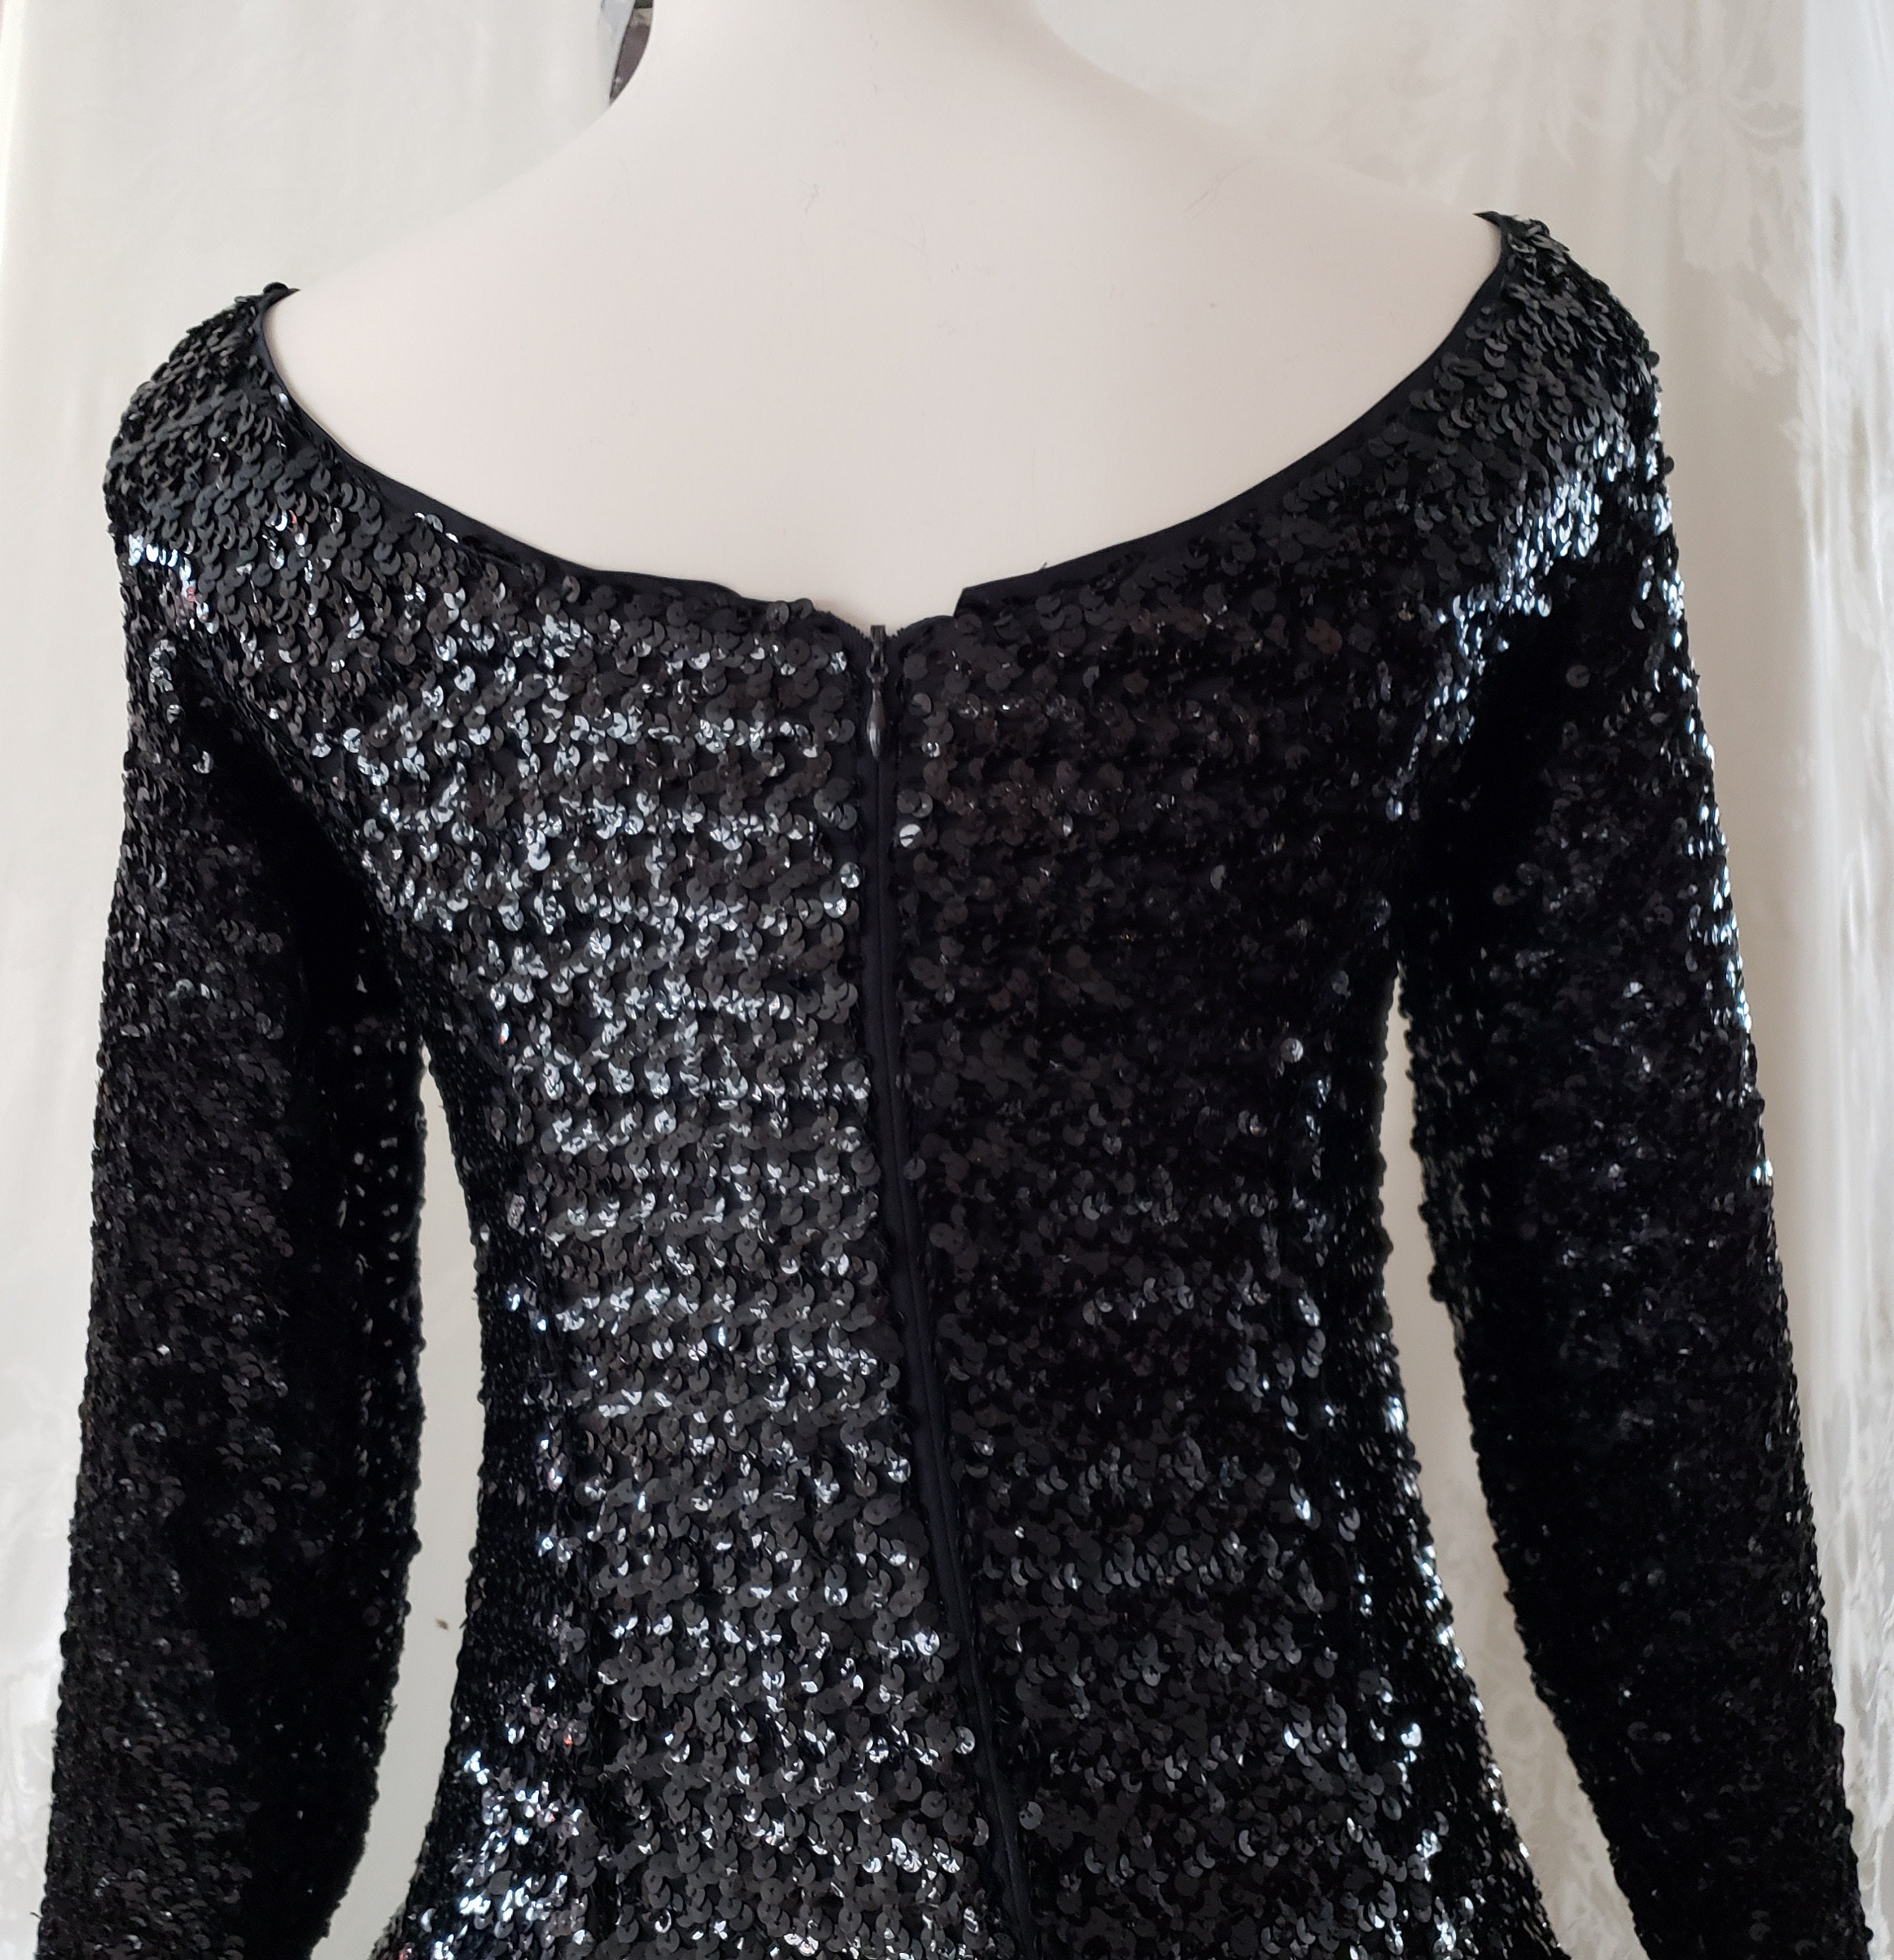 A ''million Sparkly Sequins Dress Looking Like a - Etsy